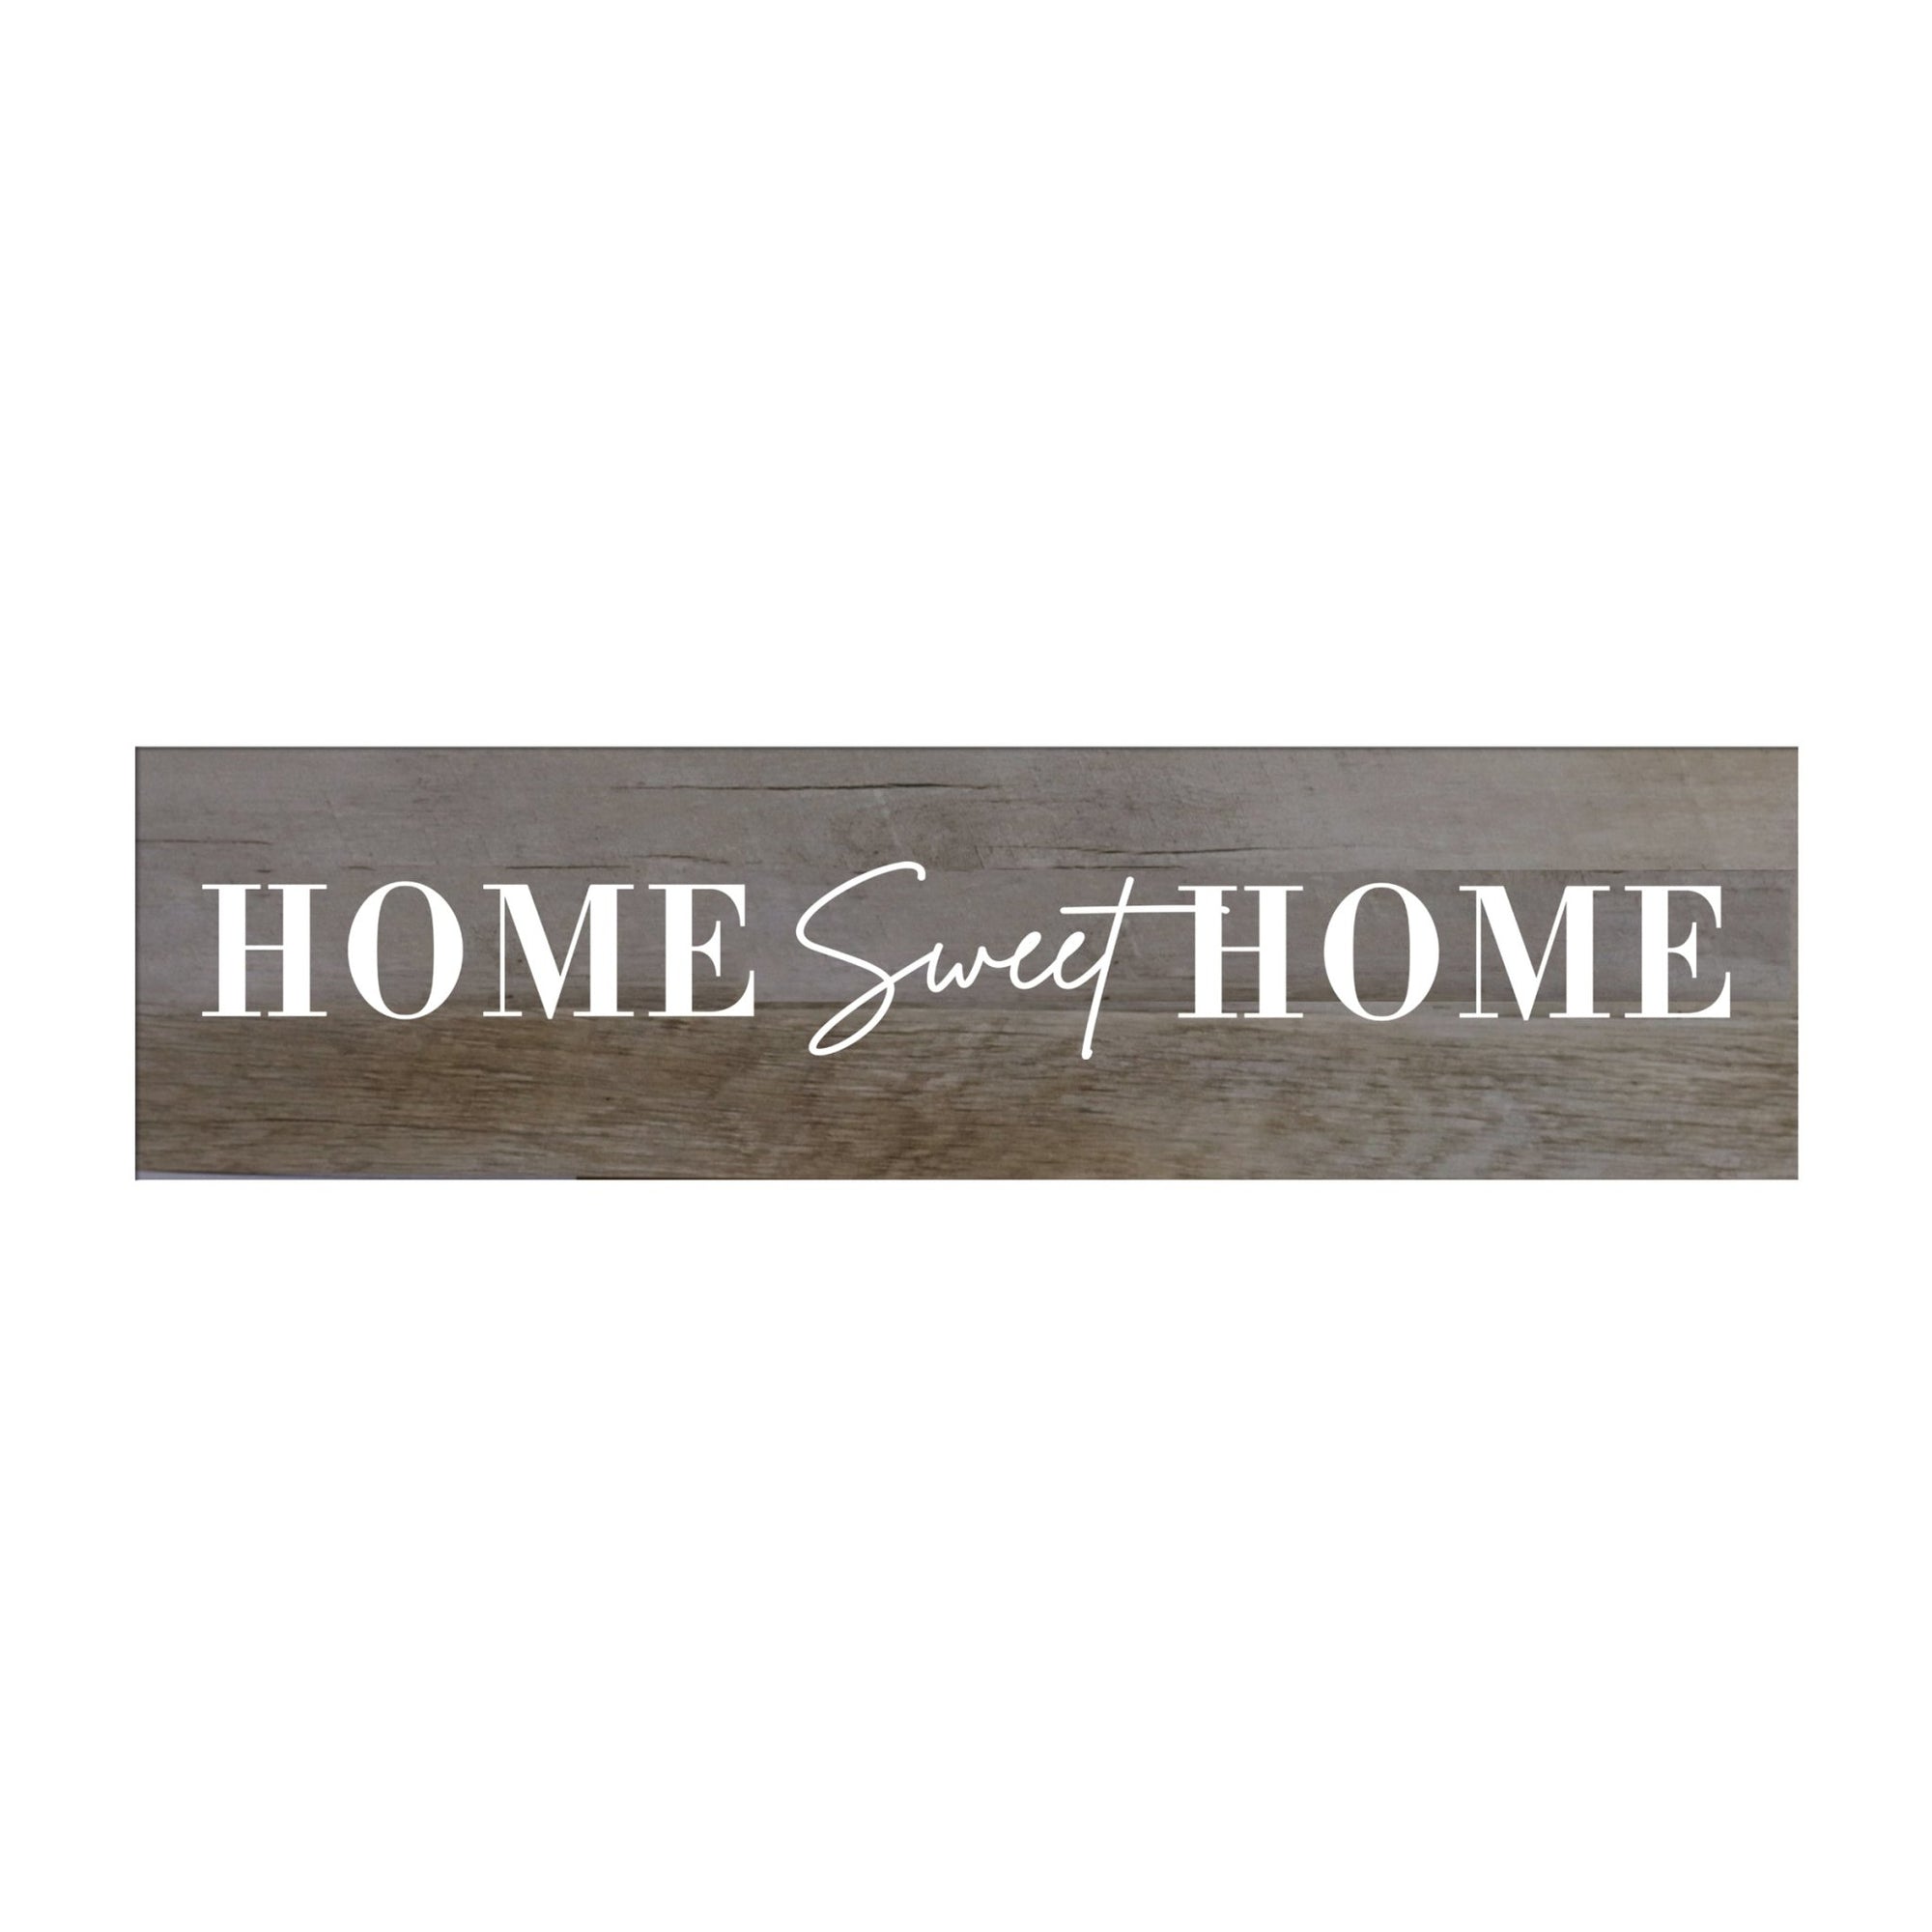 Inspirational Everyday Home and Family Wooden Wall Art Hanging Plaque 10 x 40 – Home Sweet Home - LifeSong Milestones